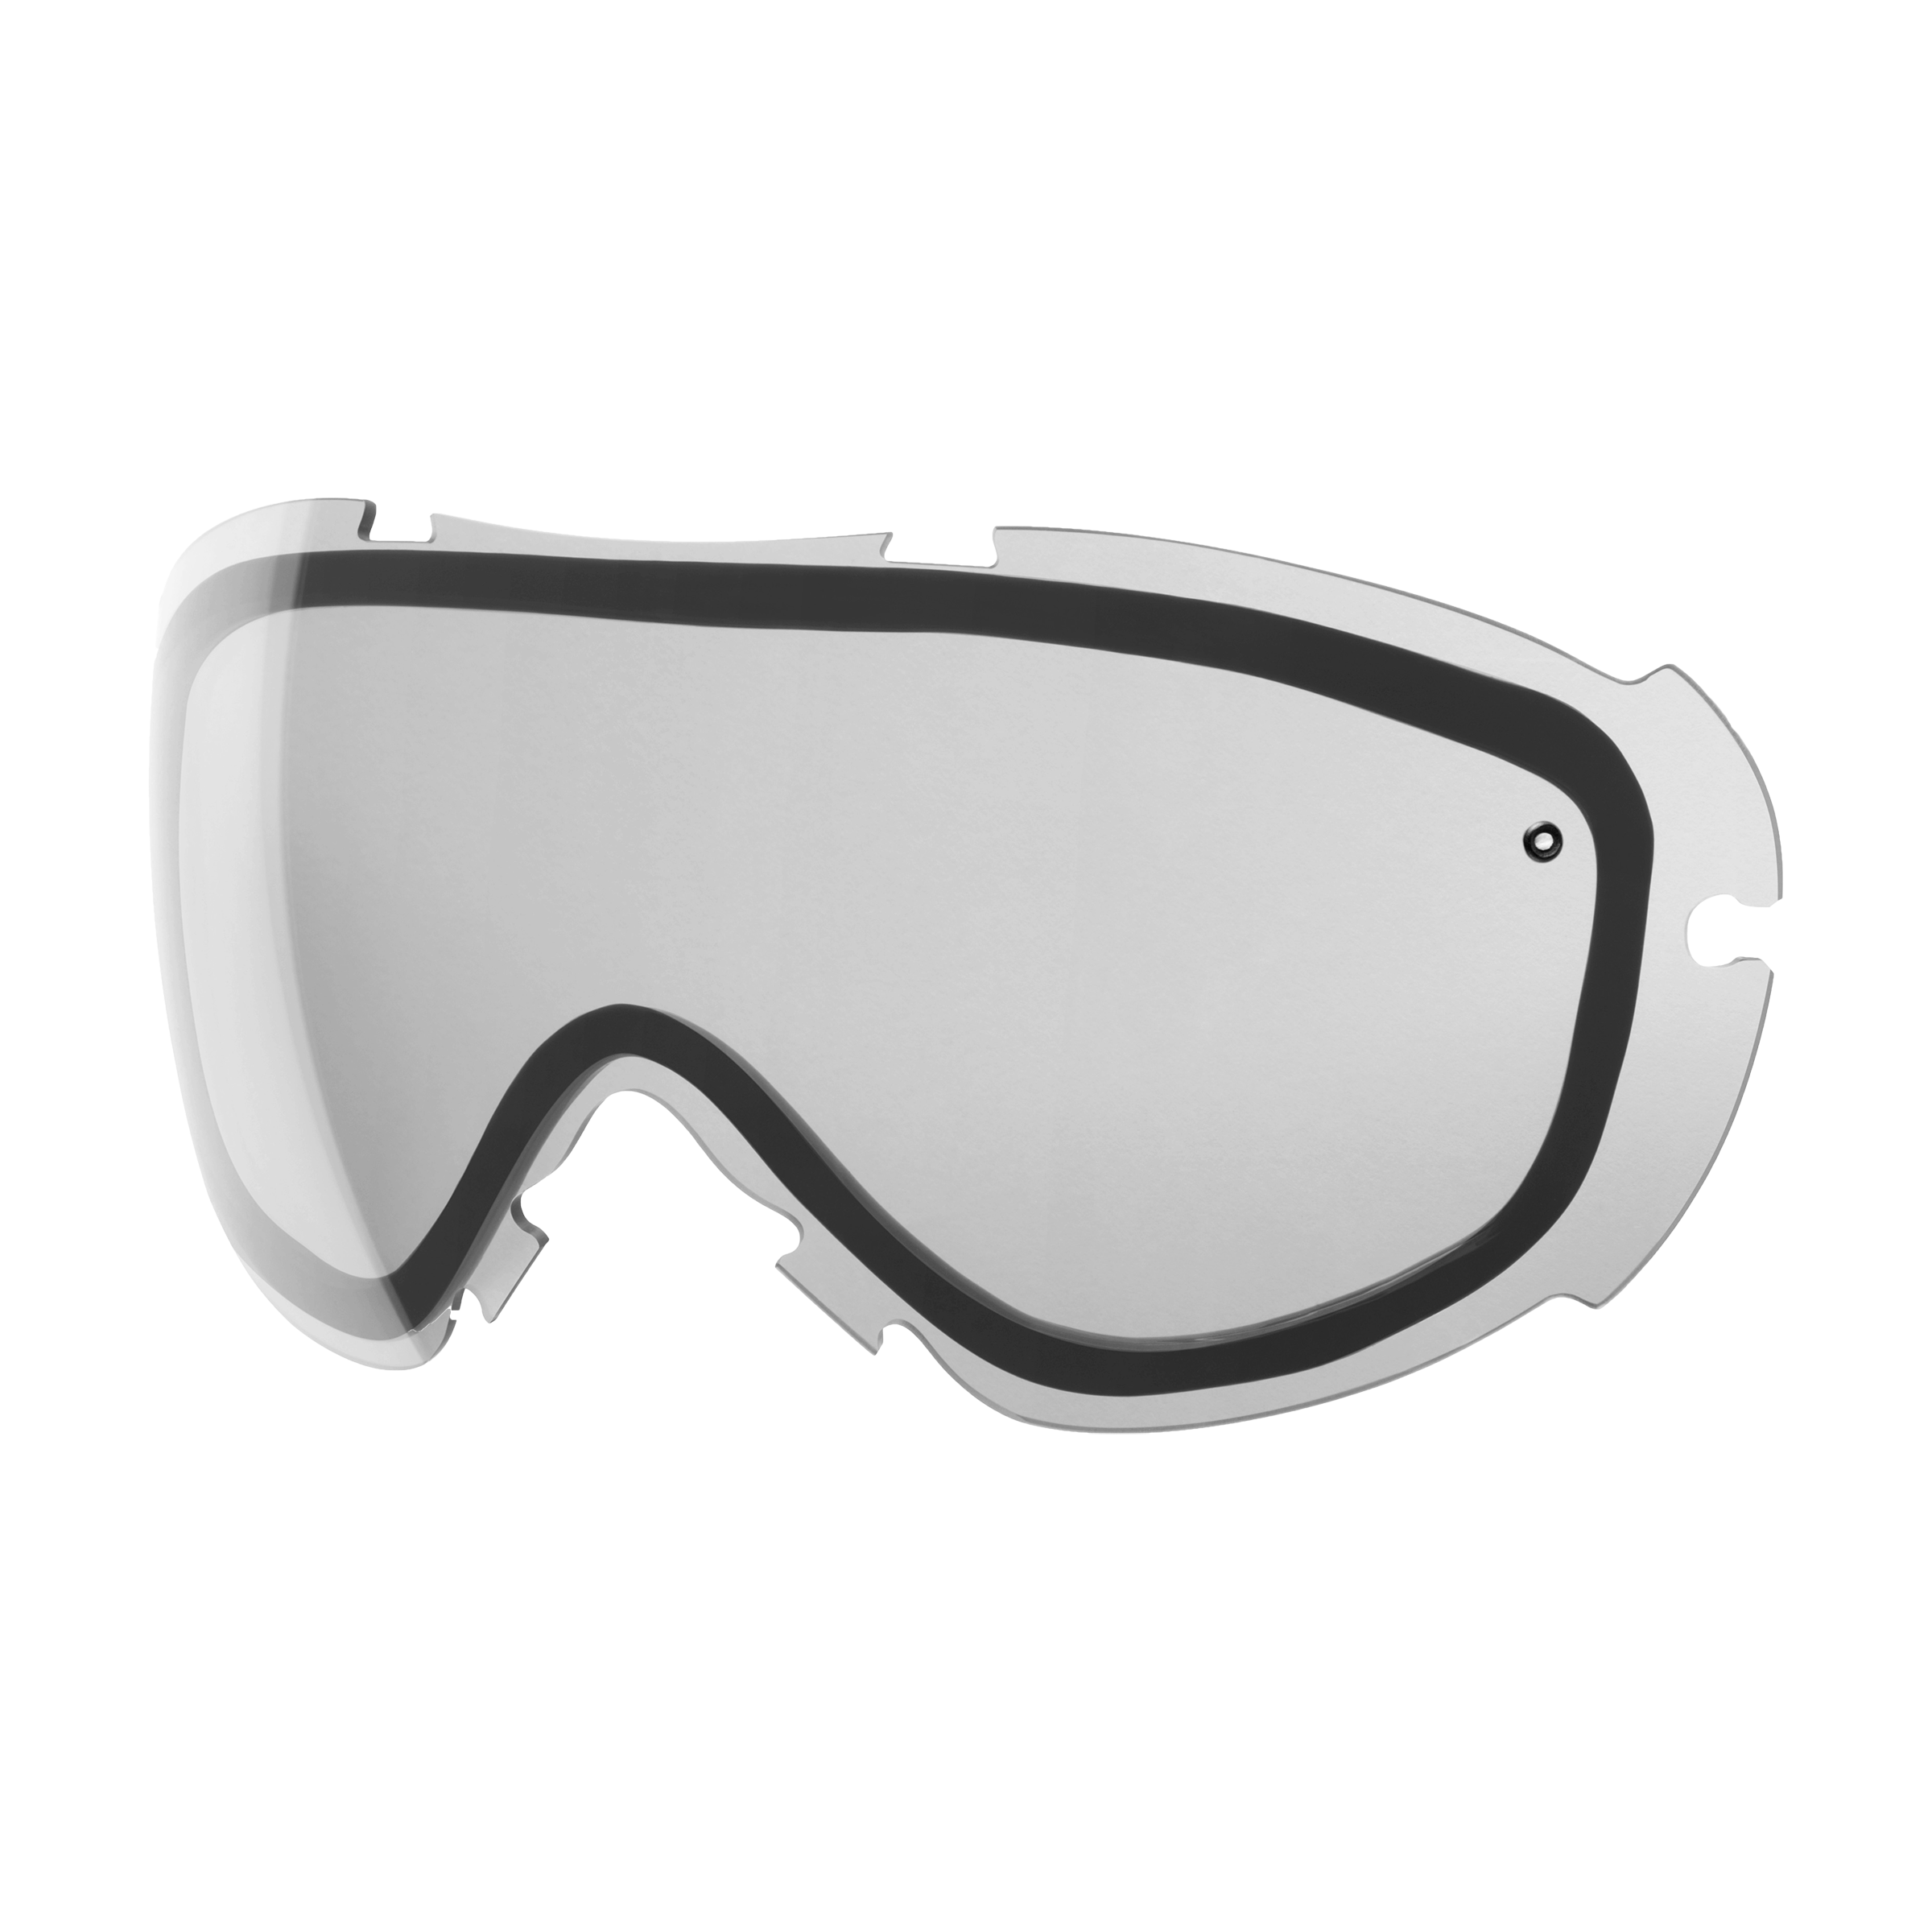 SMITH WARP GOGGLE REPLACEMENT LENS CLEAR WP1CF FITS WP1-1 GOGGLE 